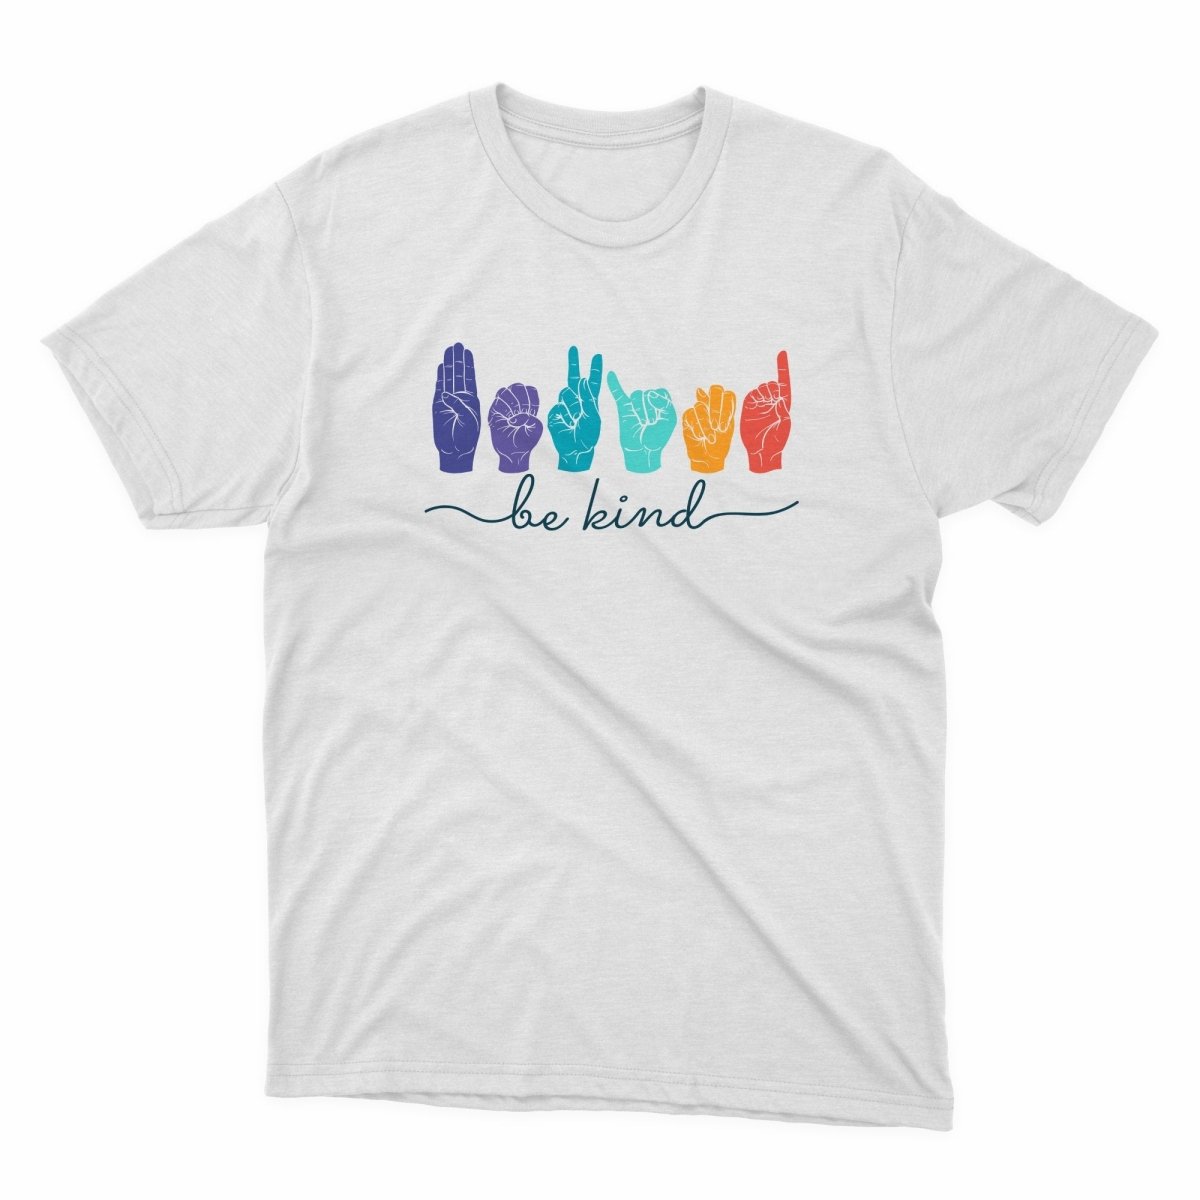 Be Kind Sign Language Shirt - stickerbullBe Kind Sign Language ShirtShirtsPrintifystickerbull32359245159883740469WhiteSa white t - shirt with the words be kind written on it